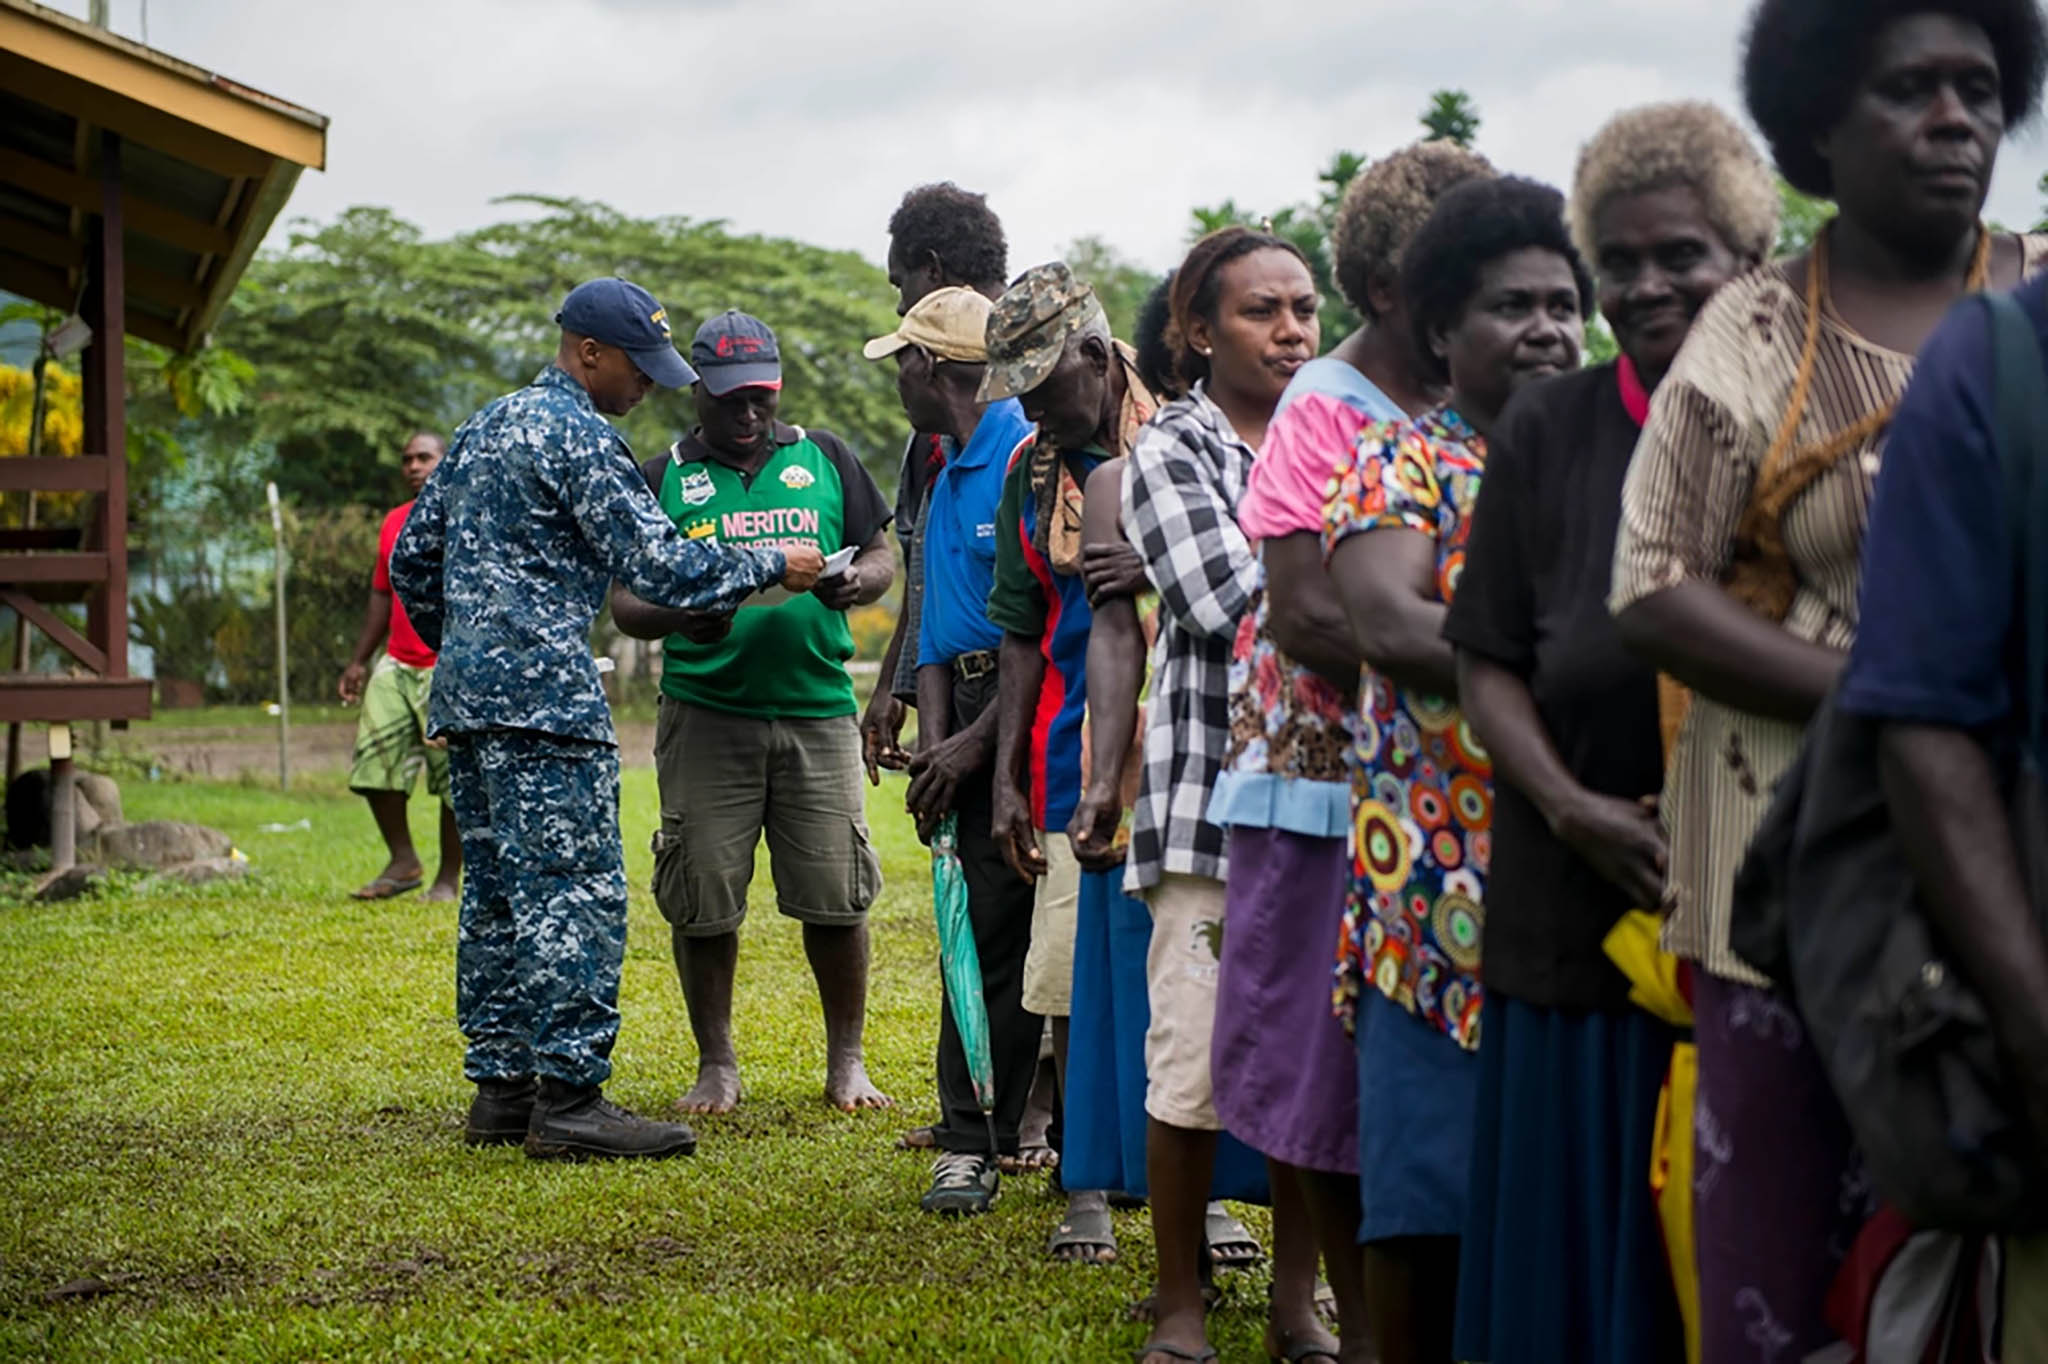 Residents of the autonomous region of Bougainville in Papua New Guinea wait in line as part of a community health engagement at the Arawa Medical Clinic, July 3, 2015. (SrA Peter Reft/DVIDS)